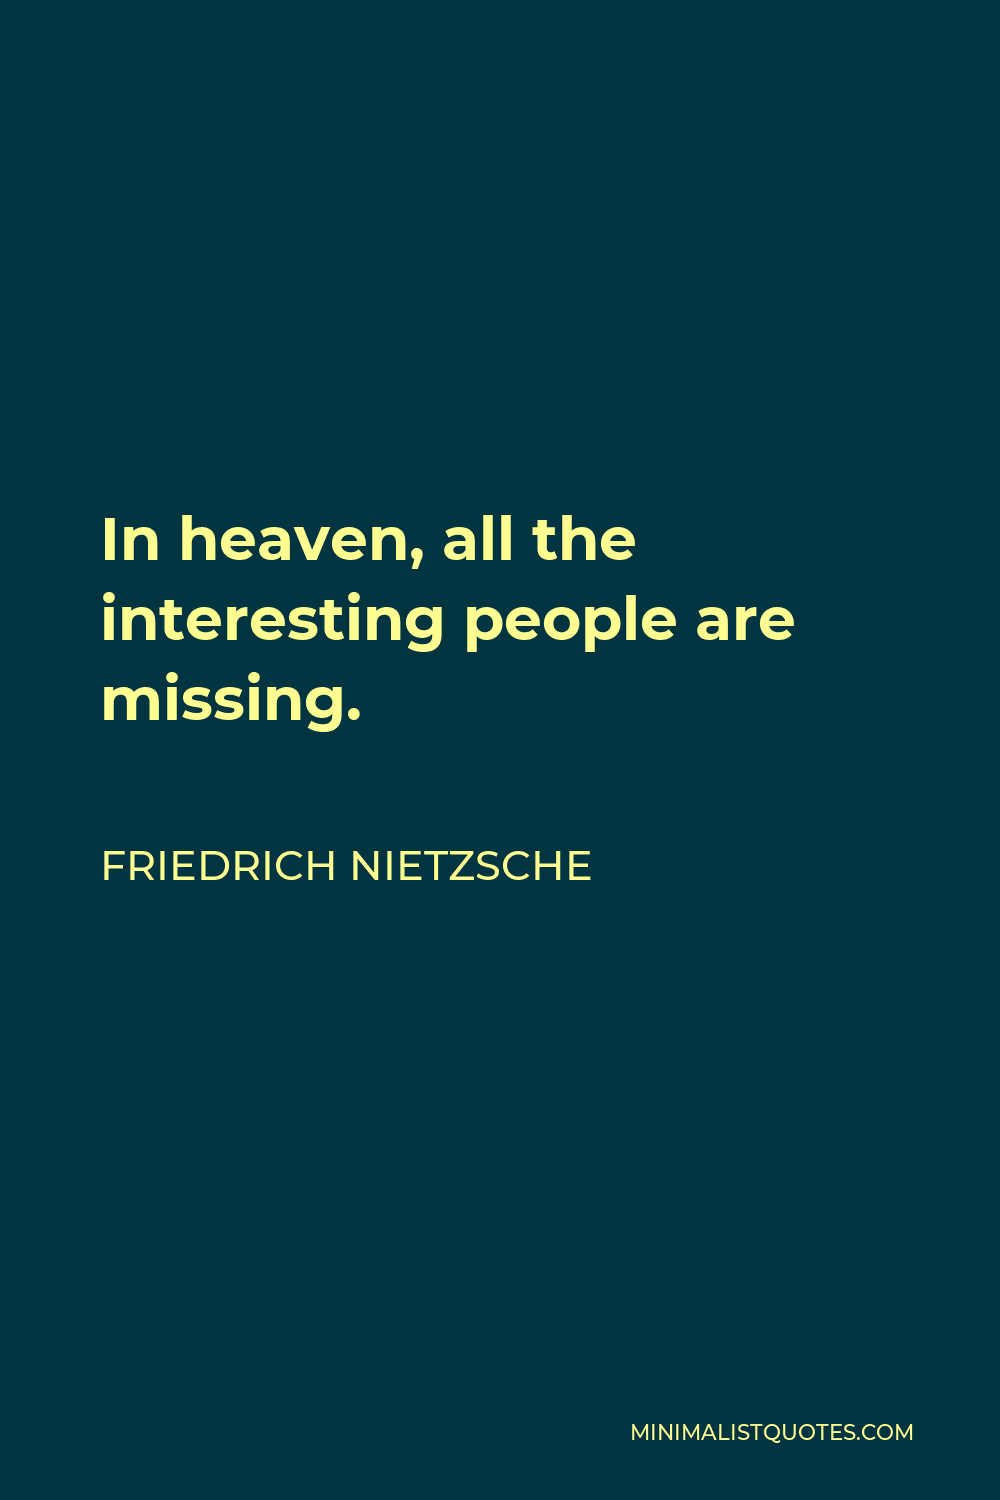 Friedrich Nietzsche Quote - In heaven, all the interesting people are missing.